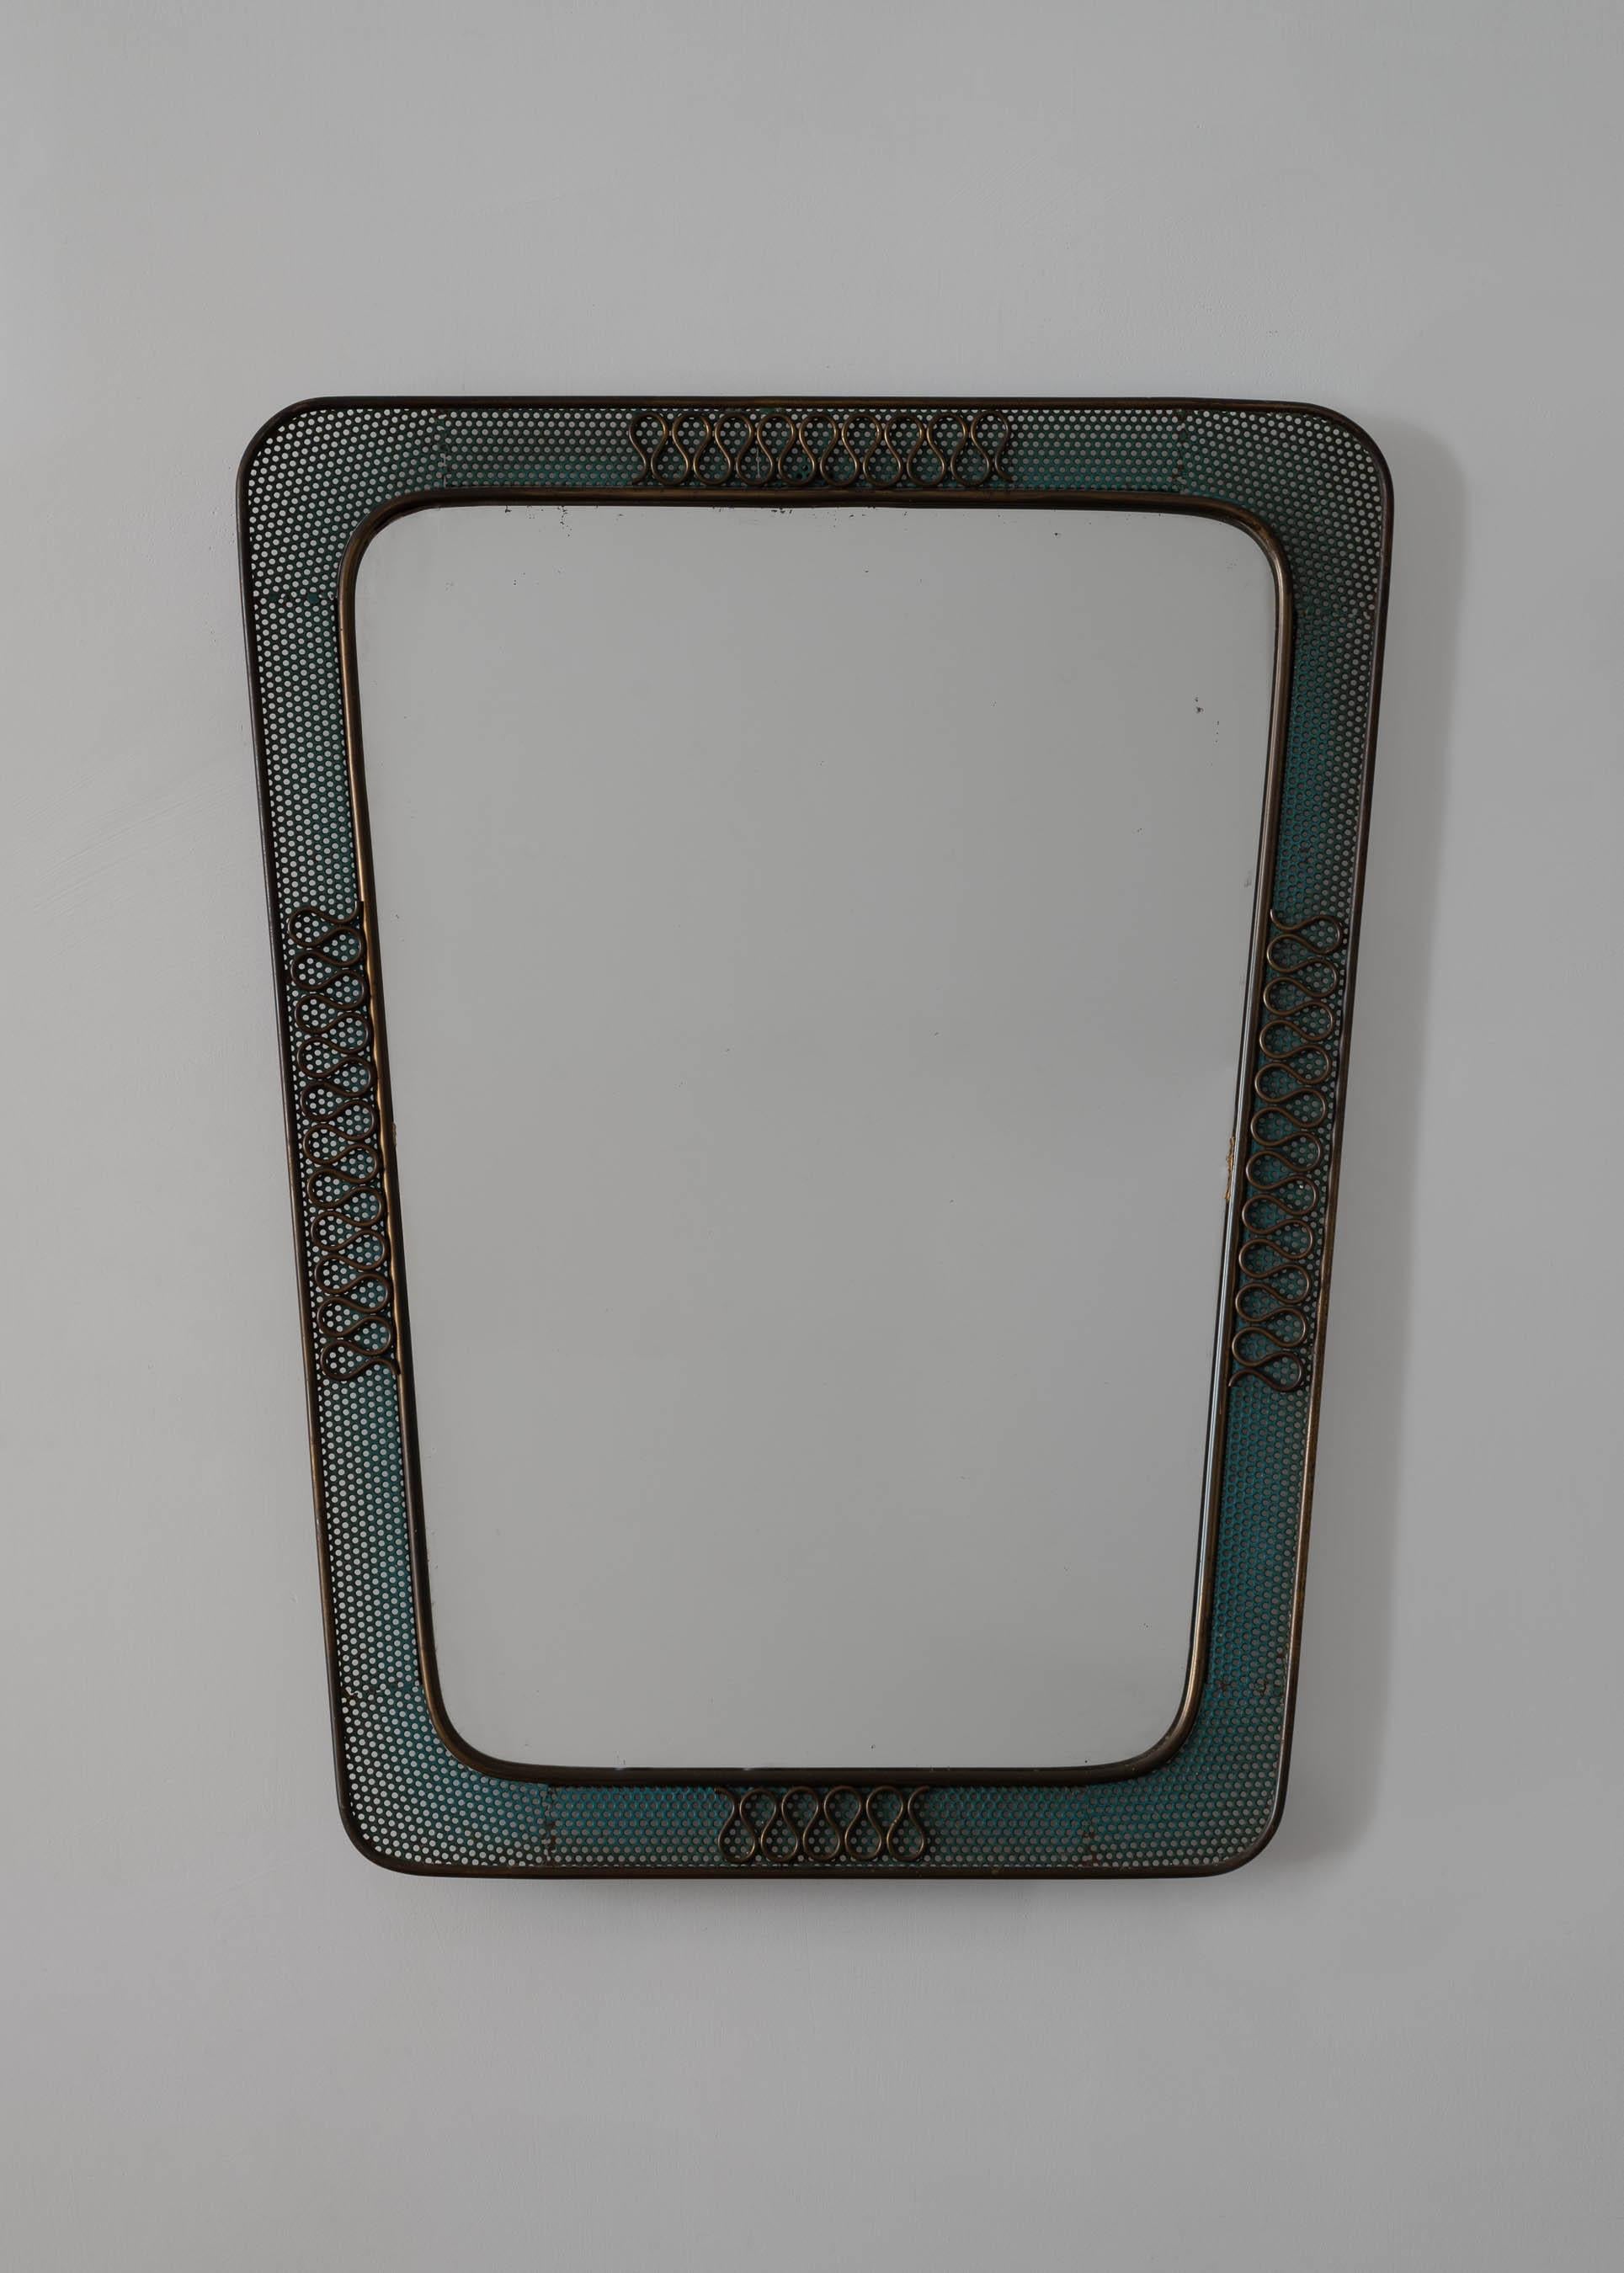 Italian brass and perforated metal mirror by Carlo Erba. Made in Italy circa 1950s.